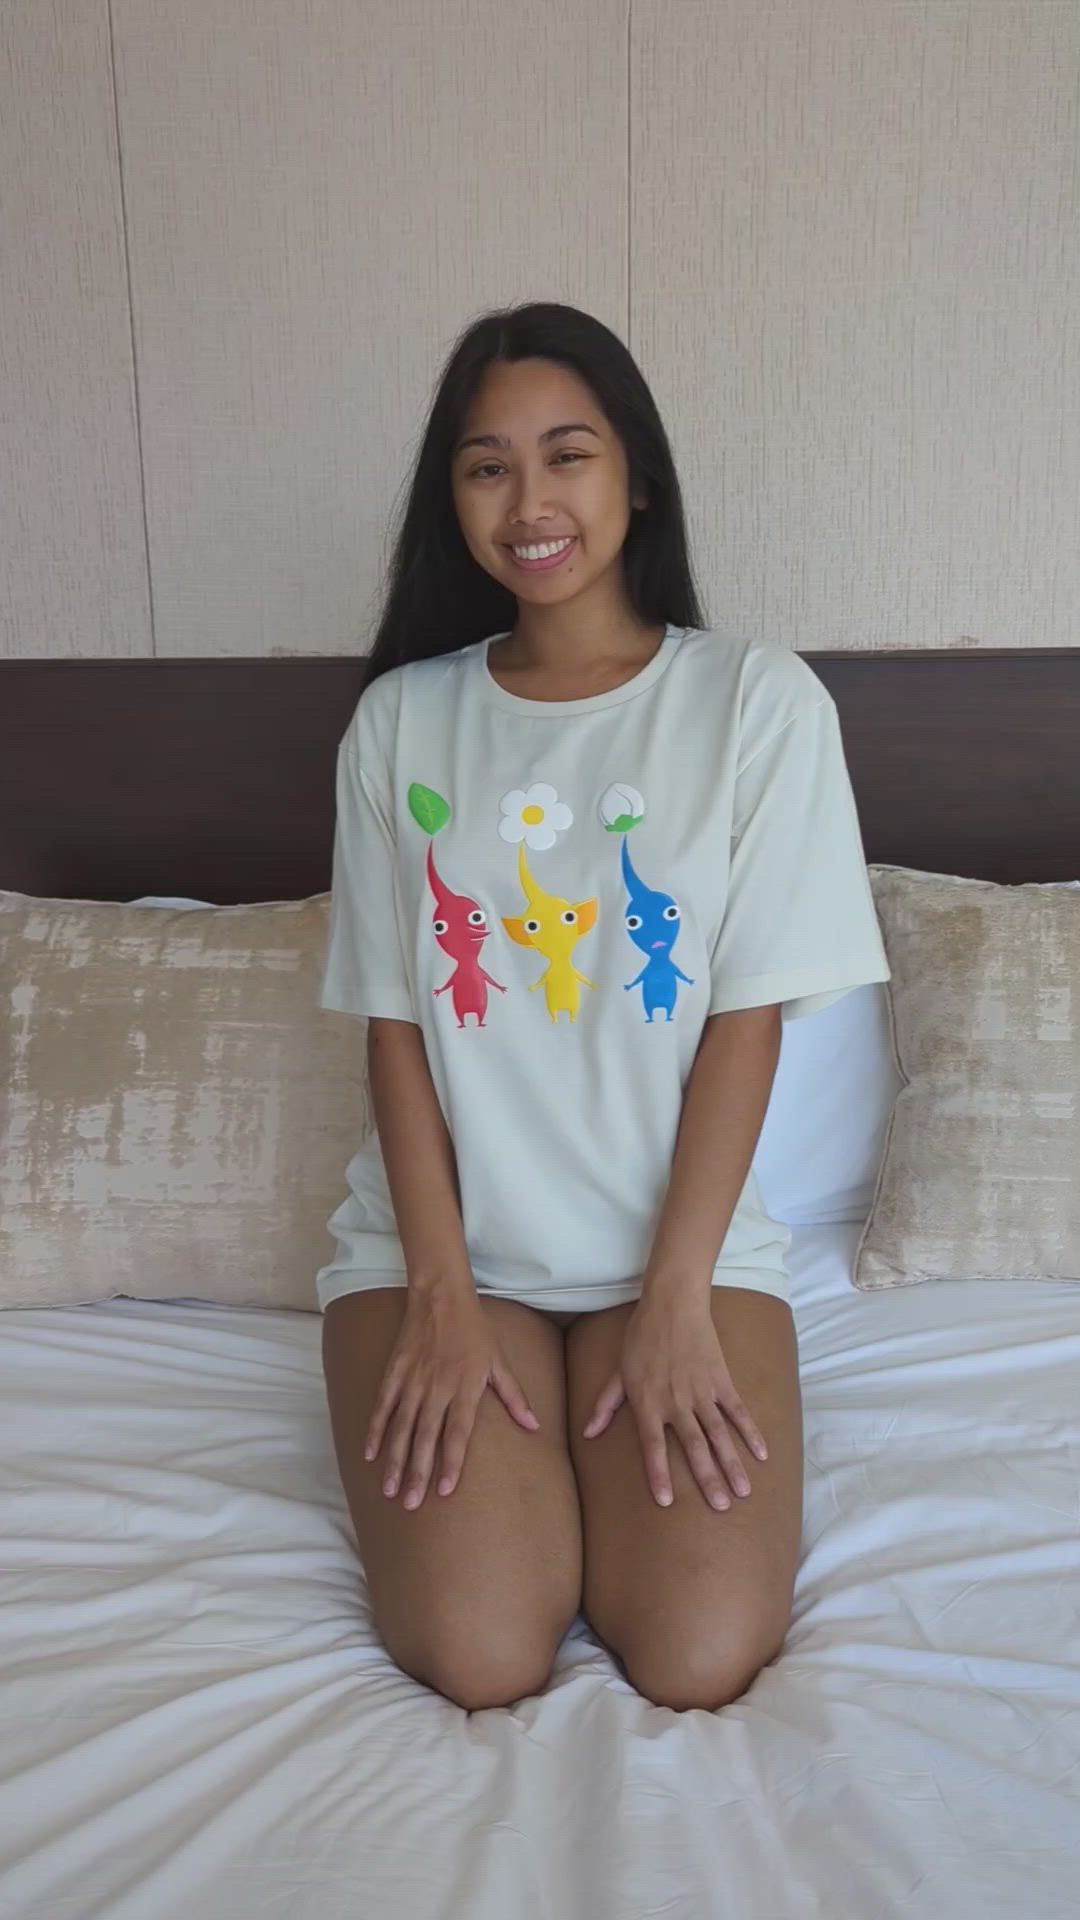 Asian porn video with onlyfans model hayleyxyz <strong>@hayleyxyz</strong>